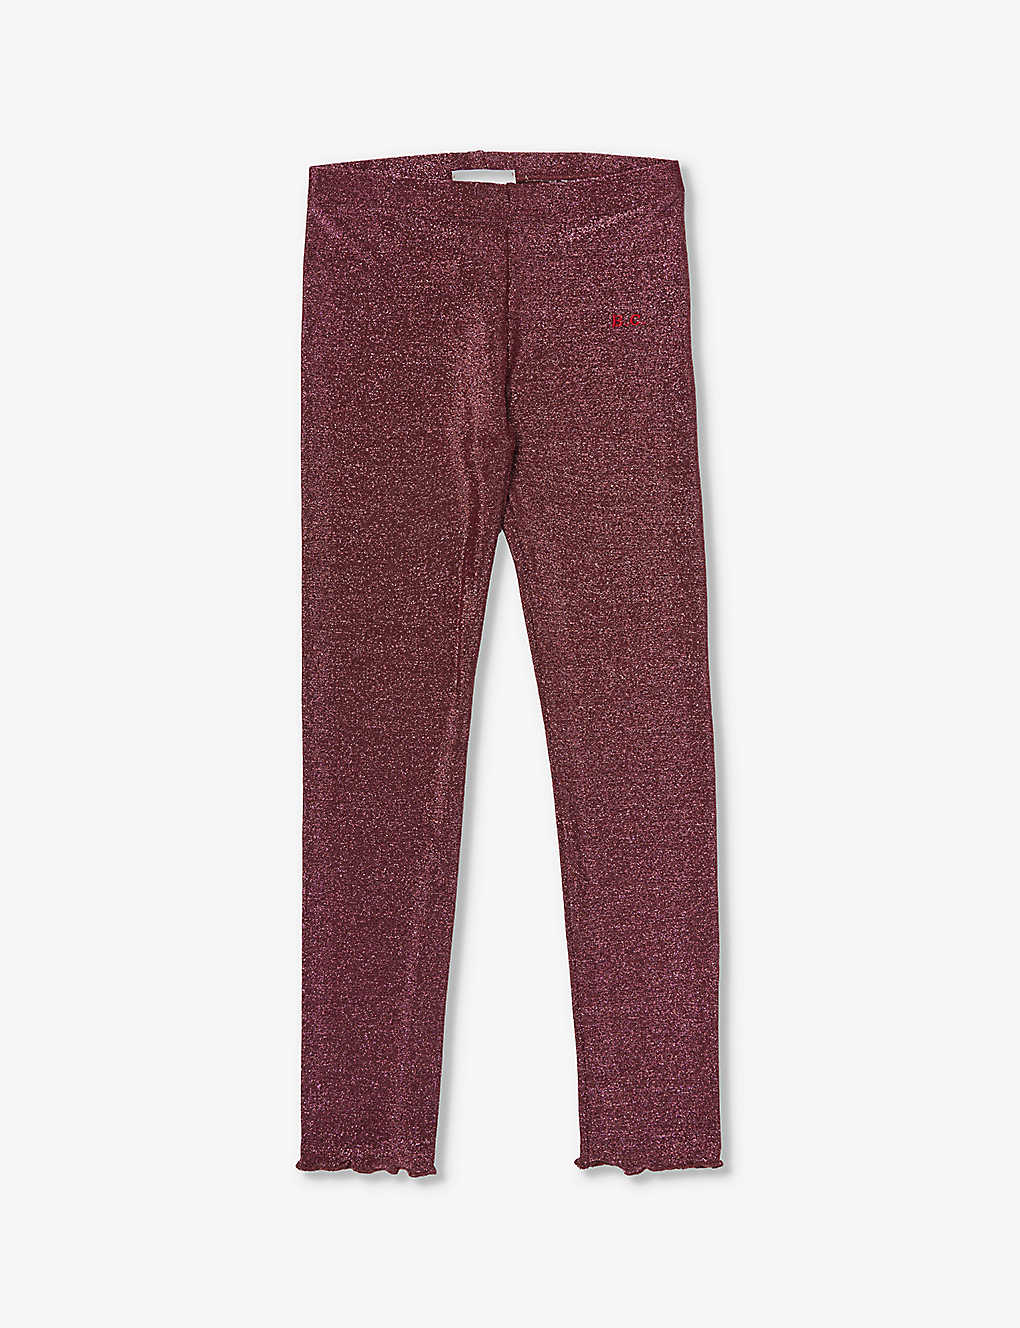 Bobo Choses Girls Burgundy Red Kids High-rise Brand-embroidered Stretch-woven Leggings 4-13 Years